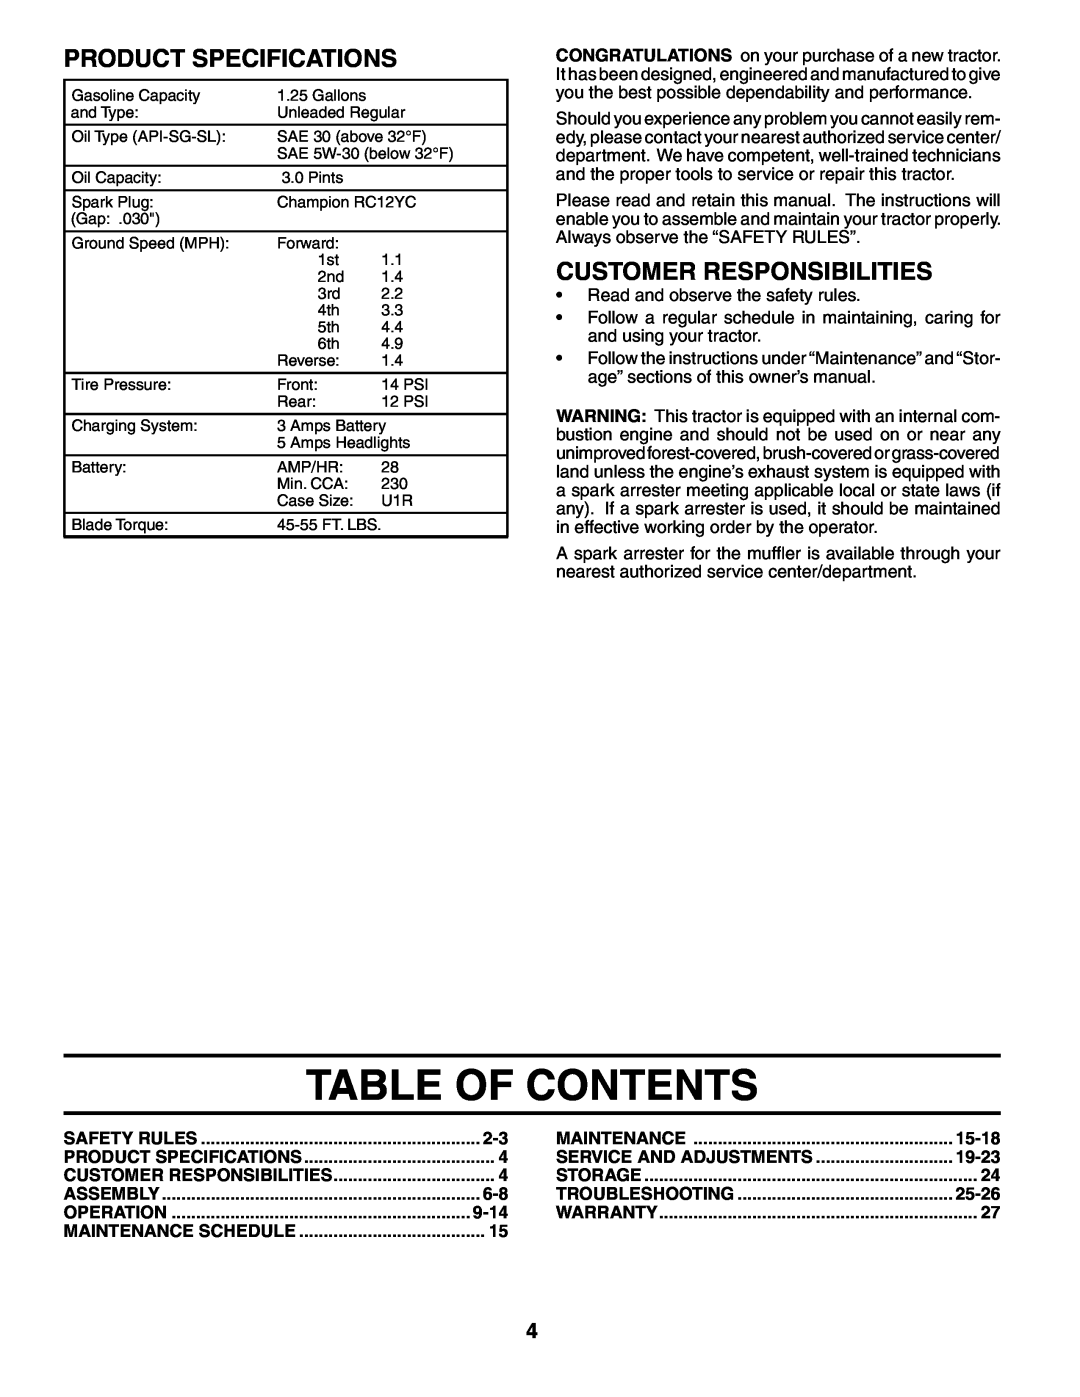 Poulan 96012004400, 401152 manual Table Of Contents, Product Specifications, Customer Responsibilities 